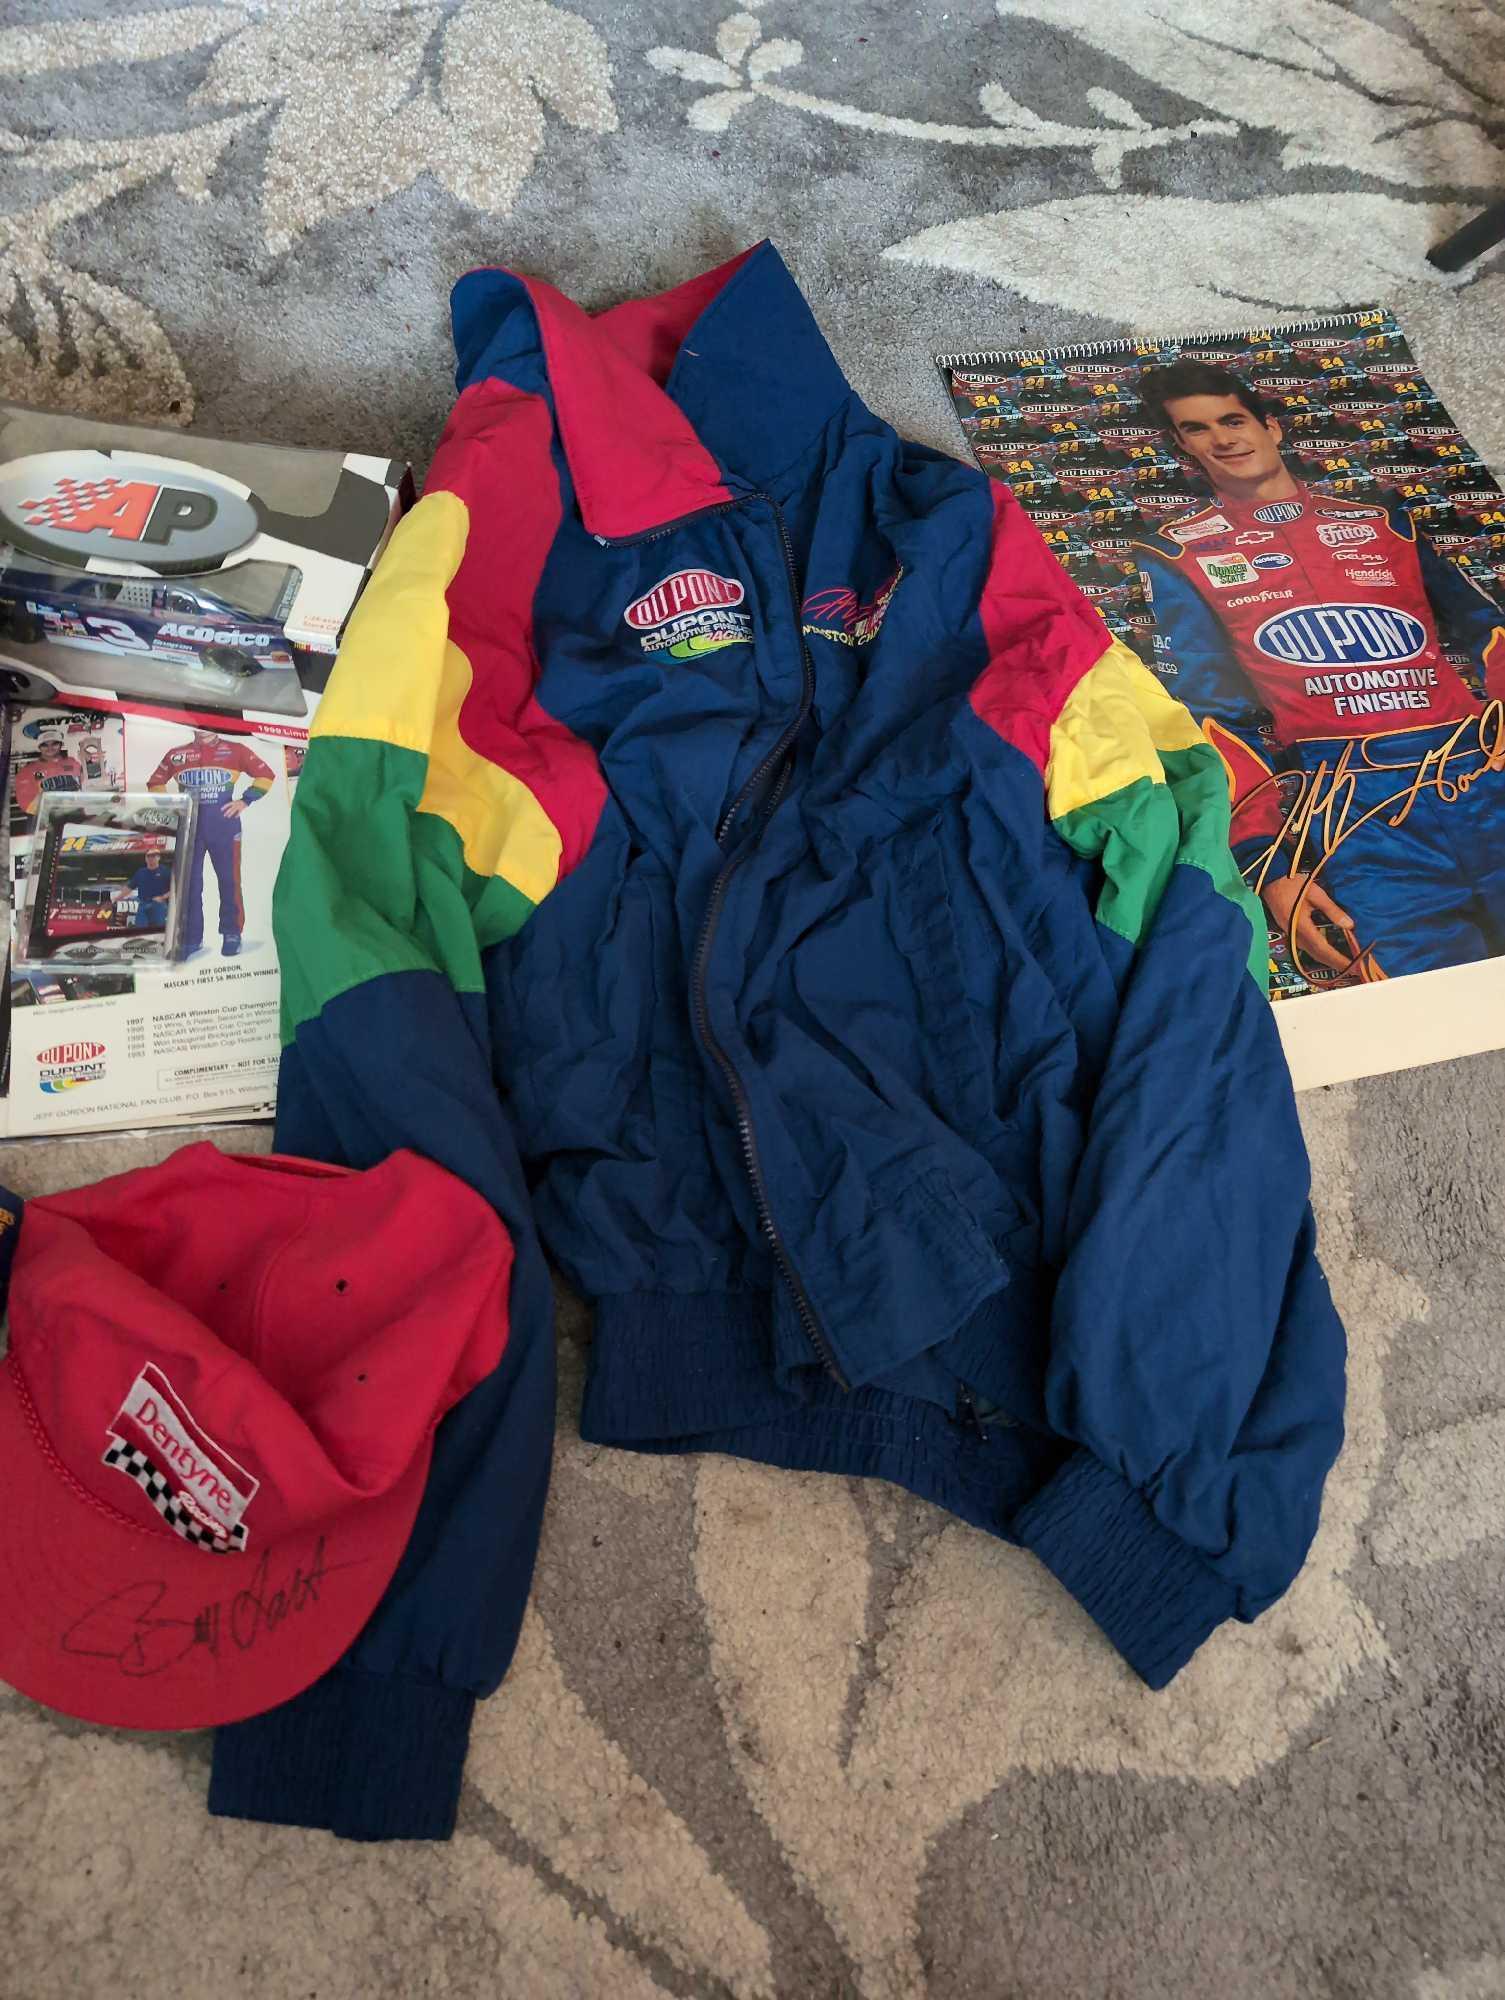 (LR) LARGE LOT OF MISC. NASCAR MEMORABILIA & COLLECTIBLES TO INCLUDE AN AUTOGRAPHED DENTYNE RACING